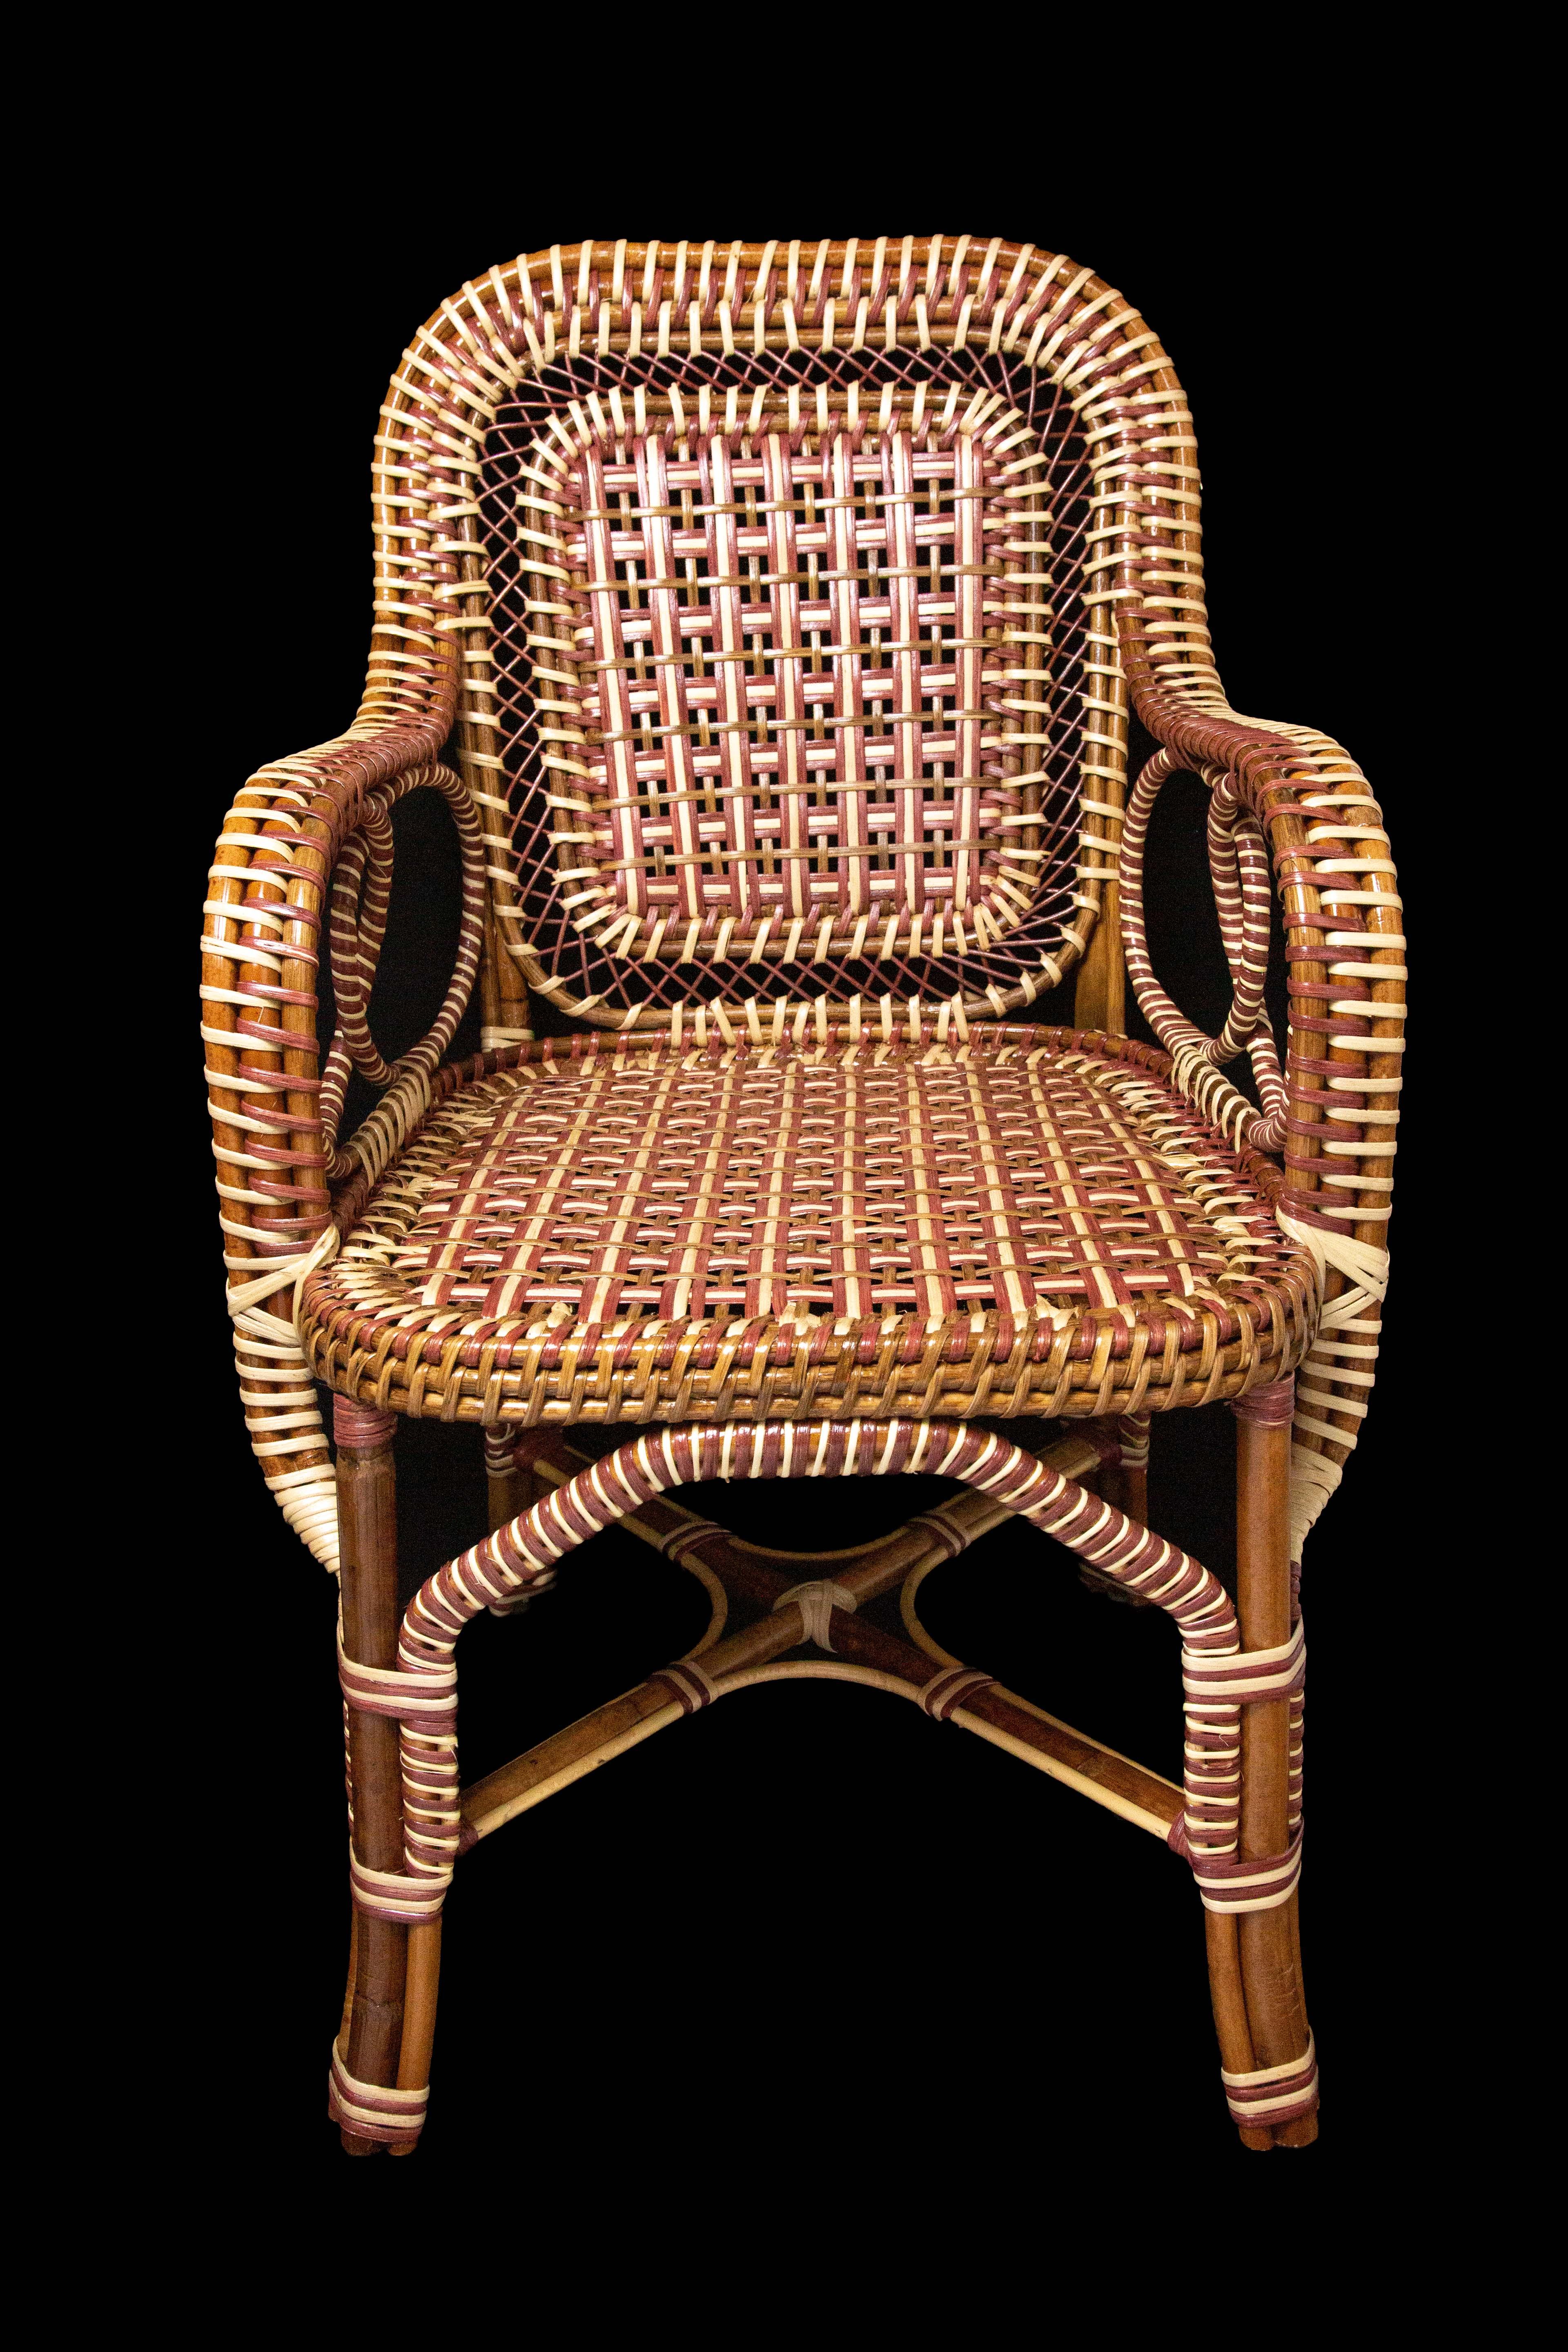 Marshan rattan armchair by Creel and Gow, in brown: Measures: 22